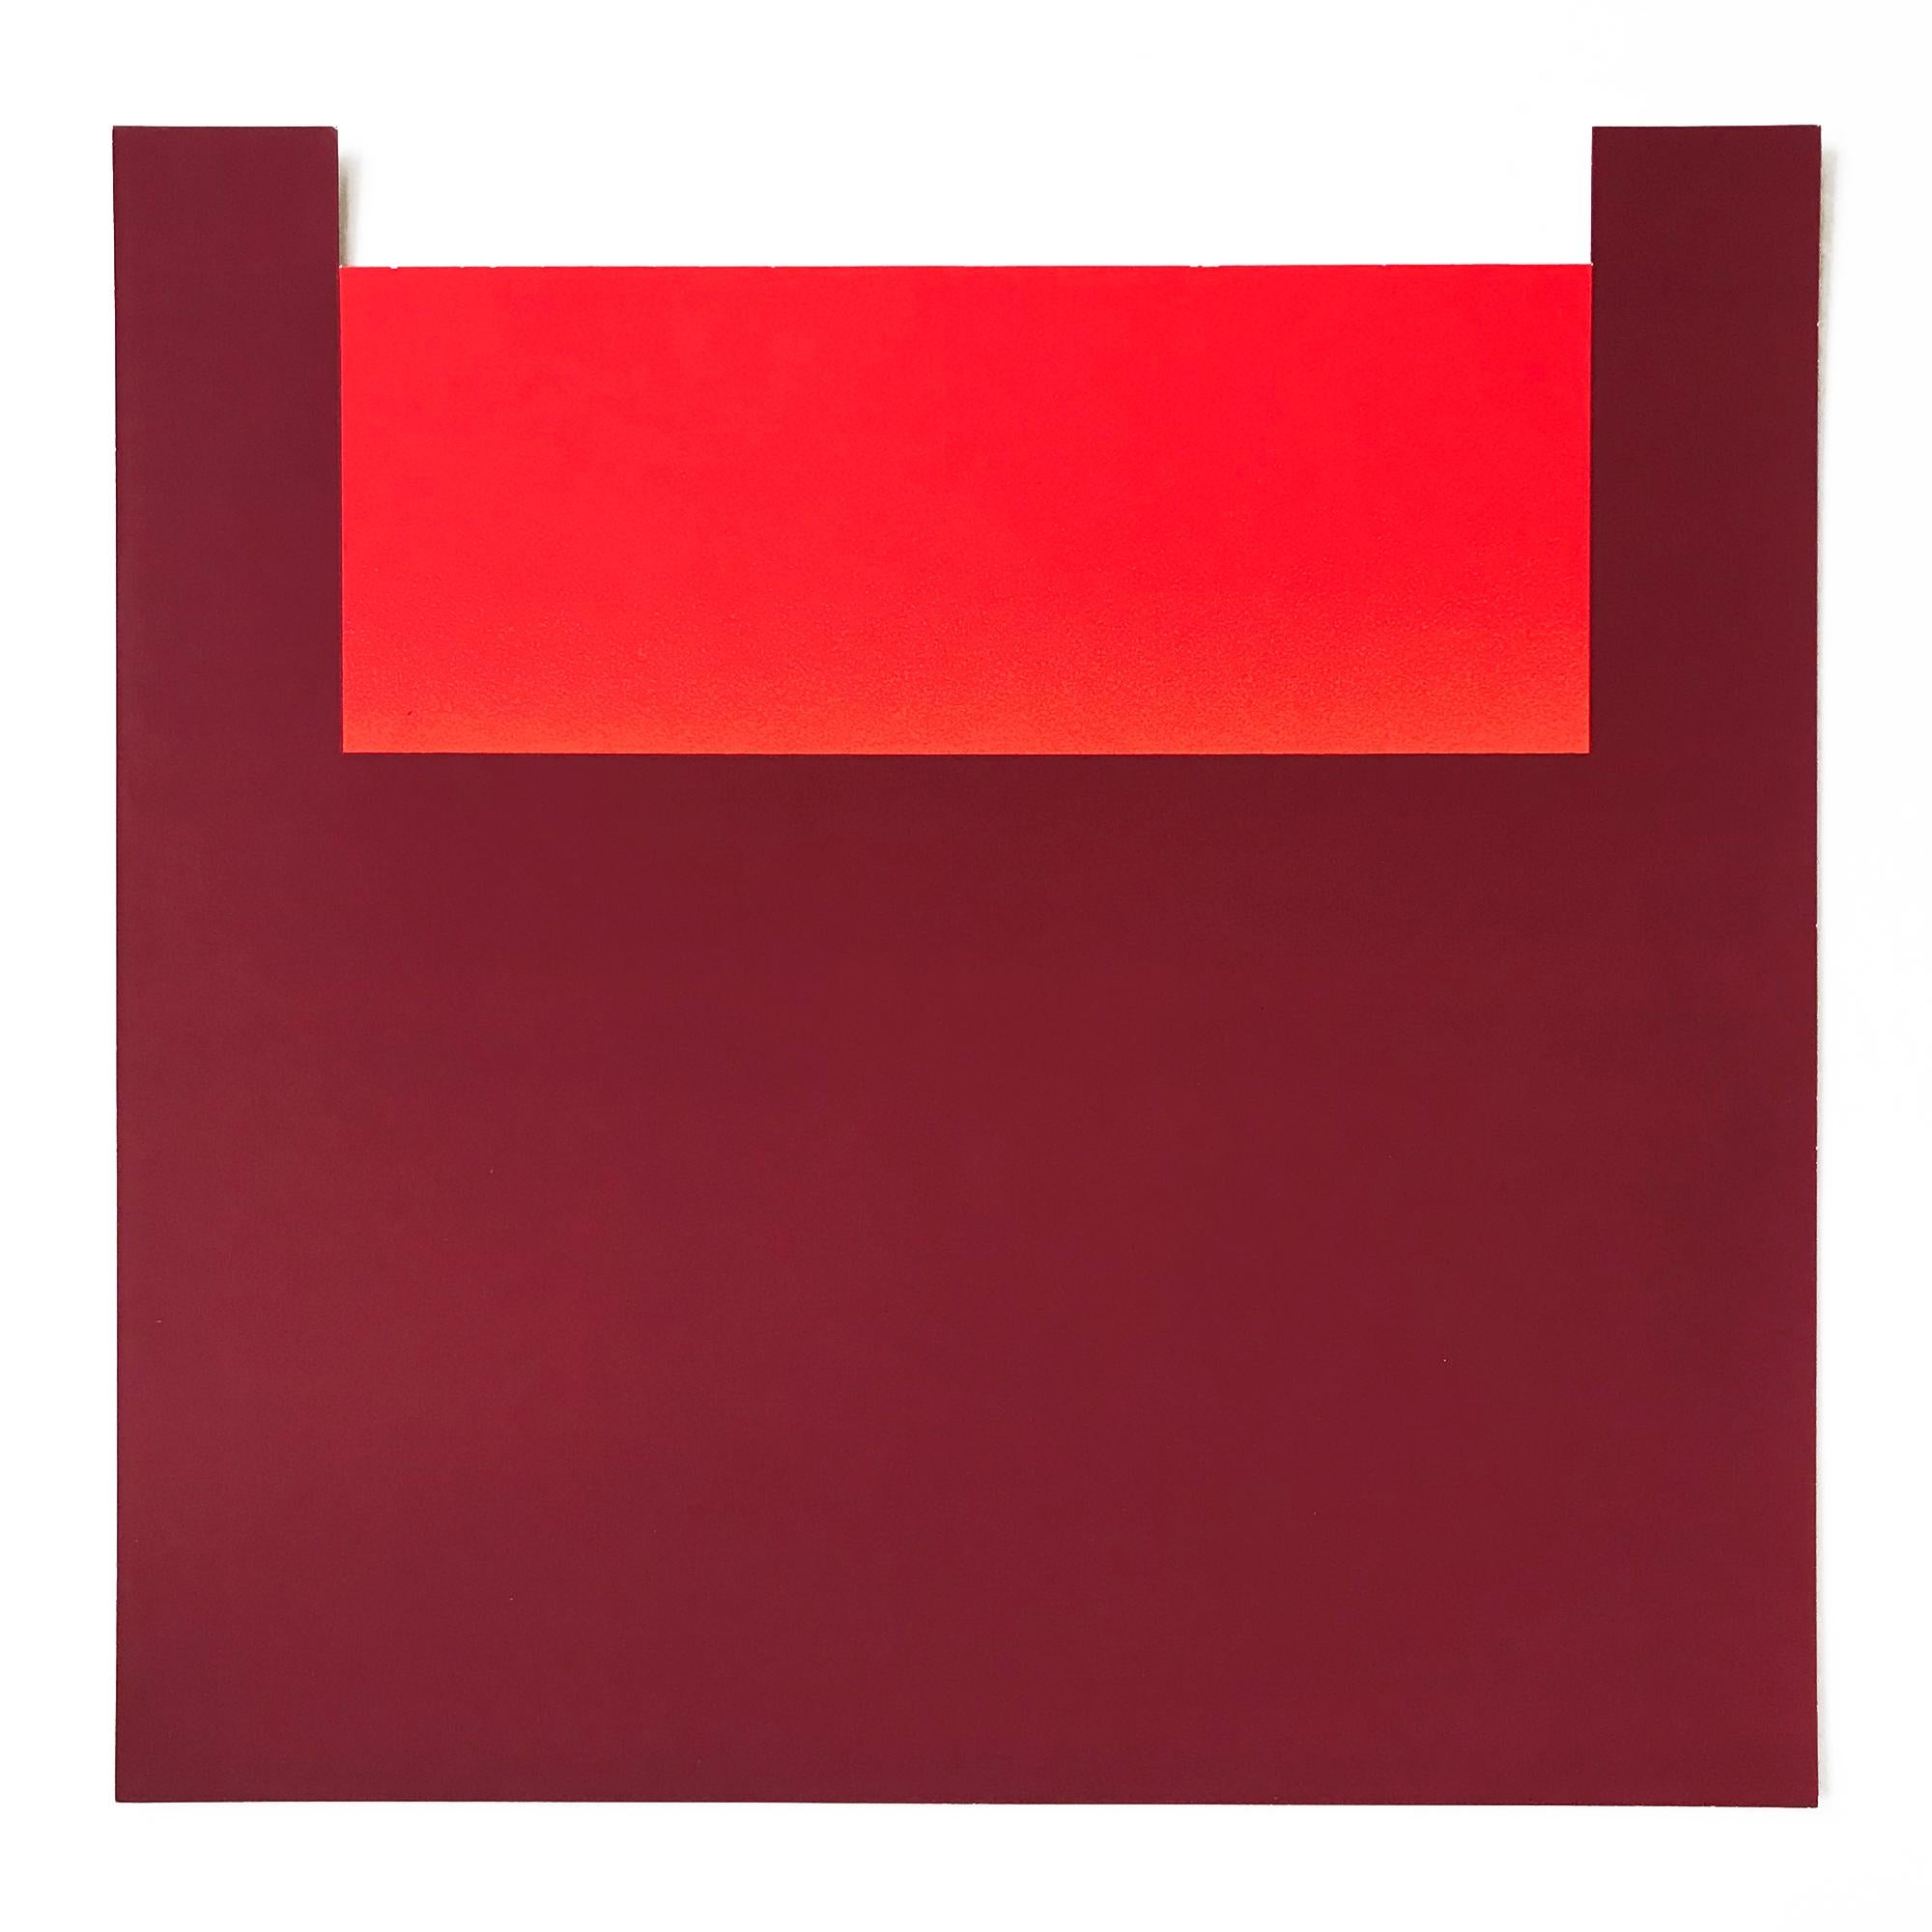 Rupprecht Geiger (1908 – Munich – 2009)
Warm Reds (No. 11 from all die roten farben), 1981
Medium: Serigraph on 270g  cardboard
Dimensions: 39.5 x 40 cm
Frame dimensions: 46.1 x 46.6 cm
Edition of 100 + XX: Hand-signed in pencil, verso
Publisher: